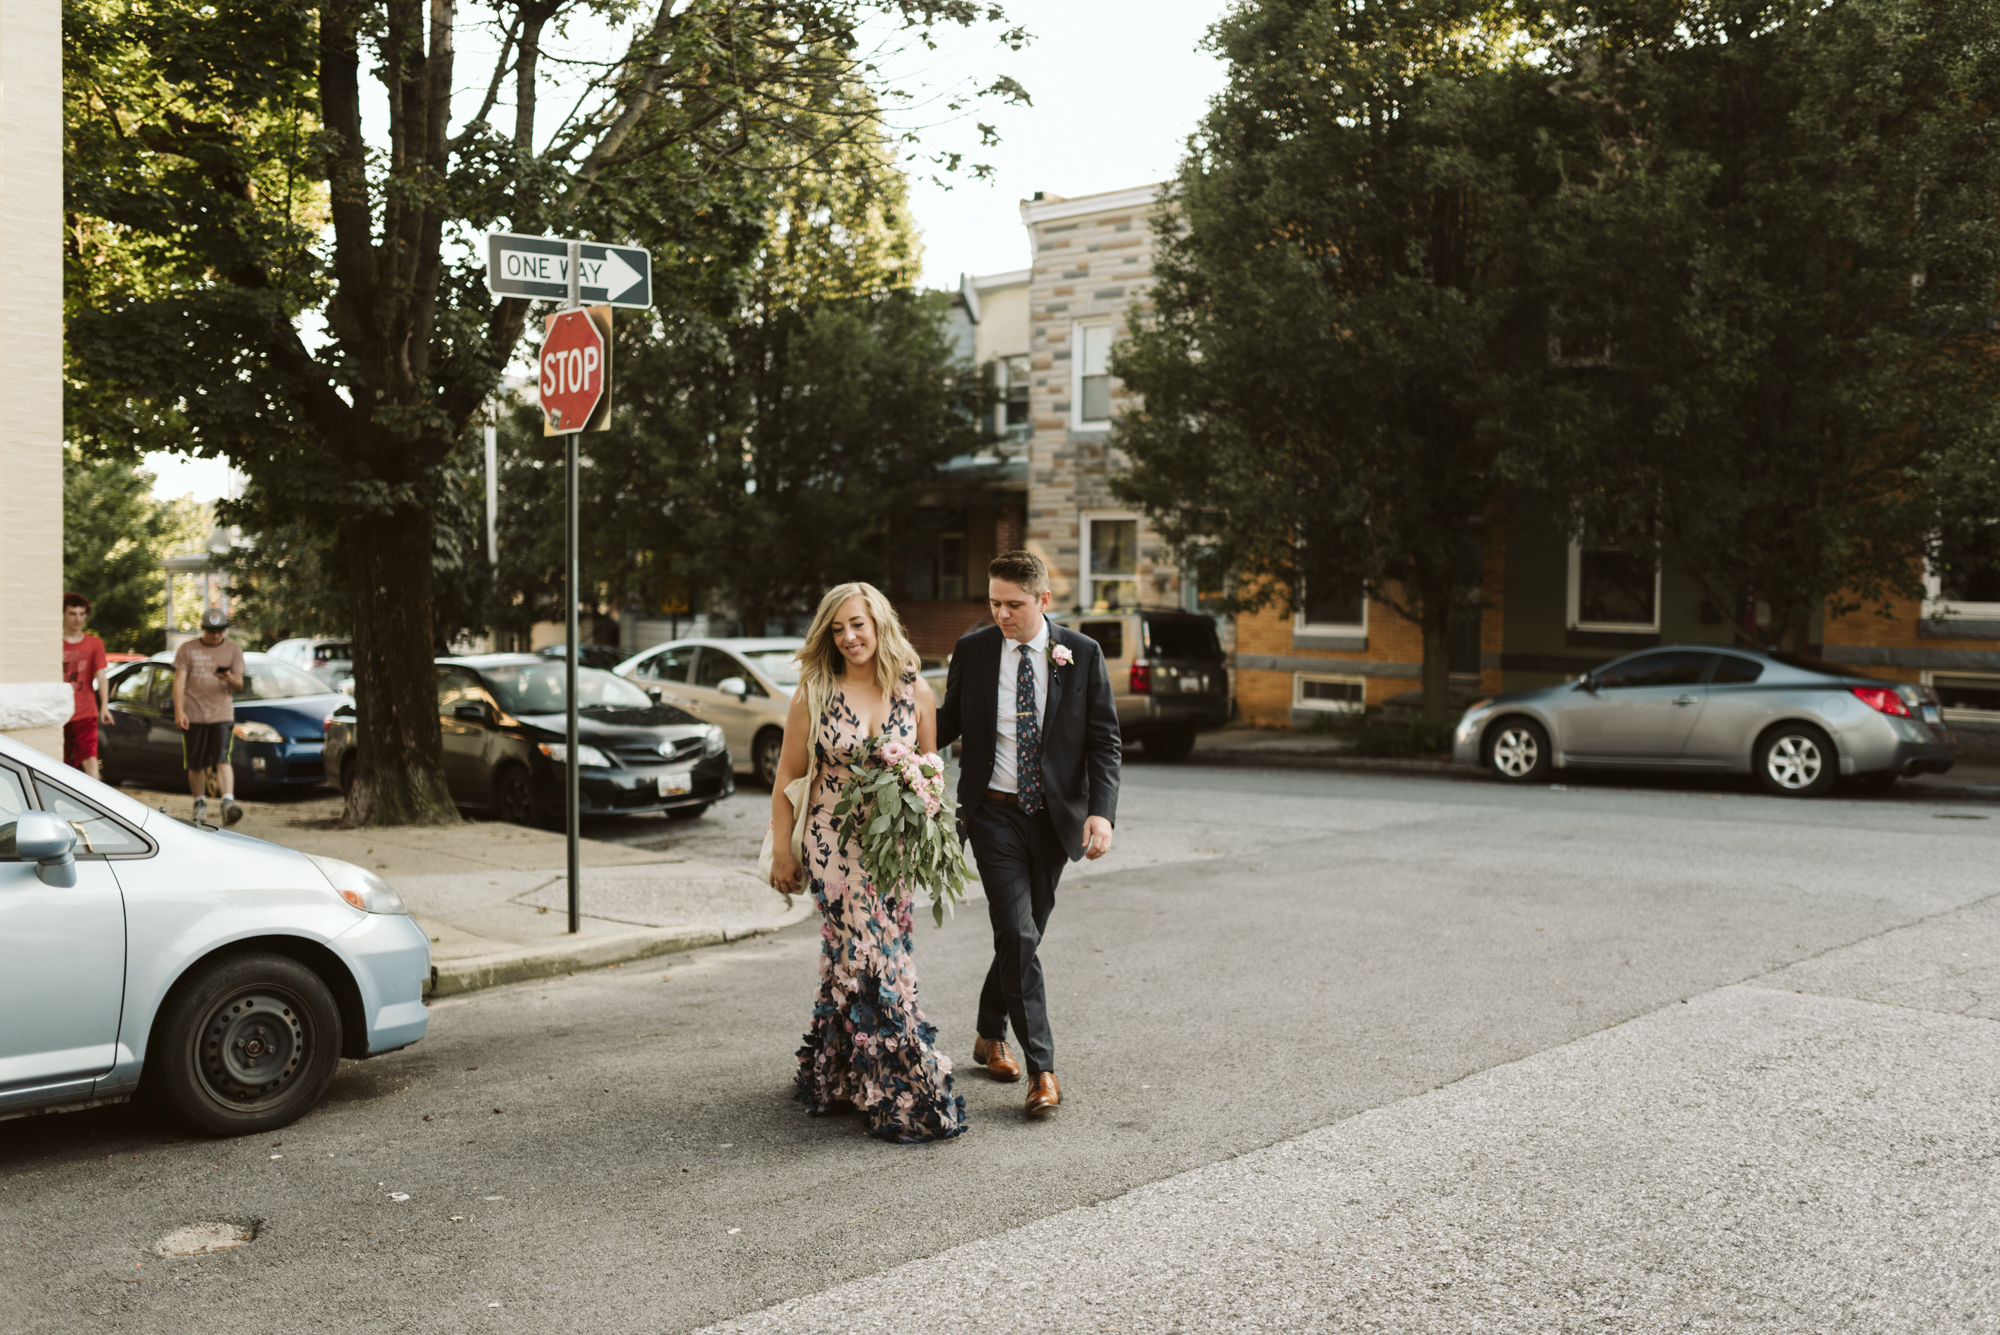 Pop-up Ceremony, Outdoor Wedding, Casual, Simple, Lake Roland, Baltimore, Maryland Wedding Photographer, Laid Back, Couple Walking Down Street in Hampden